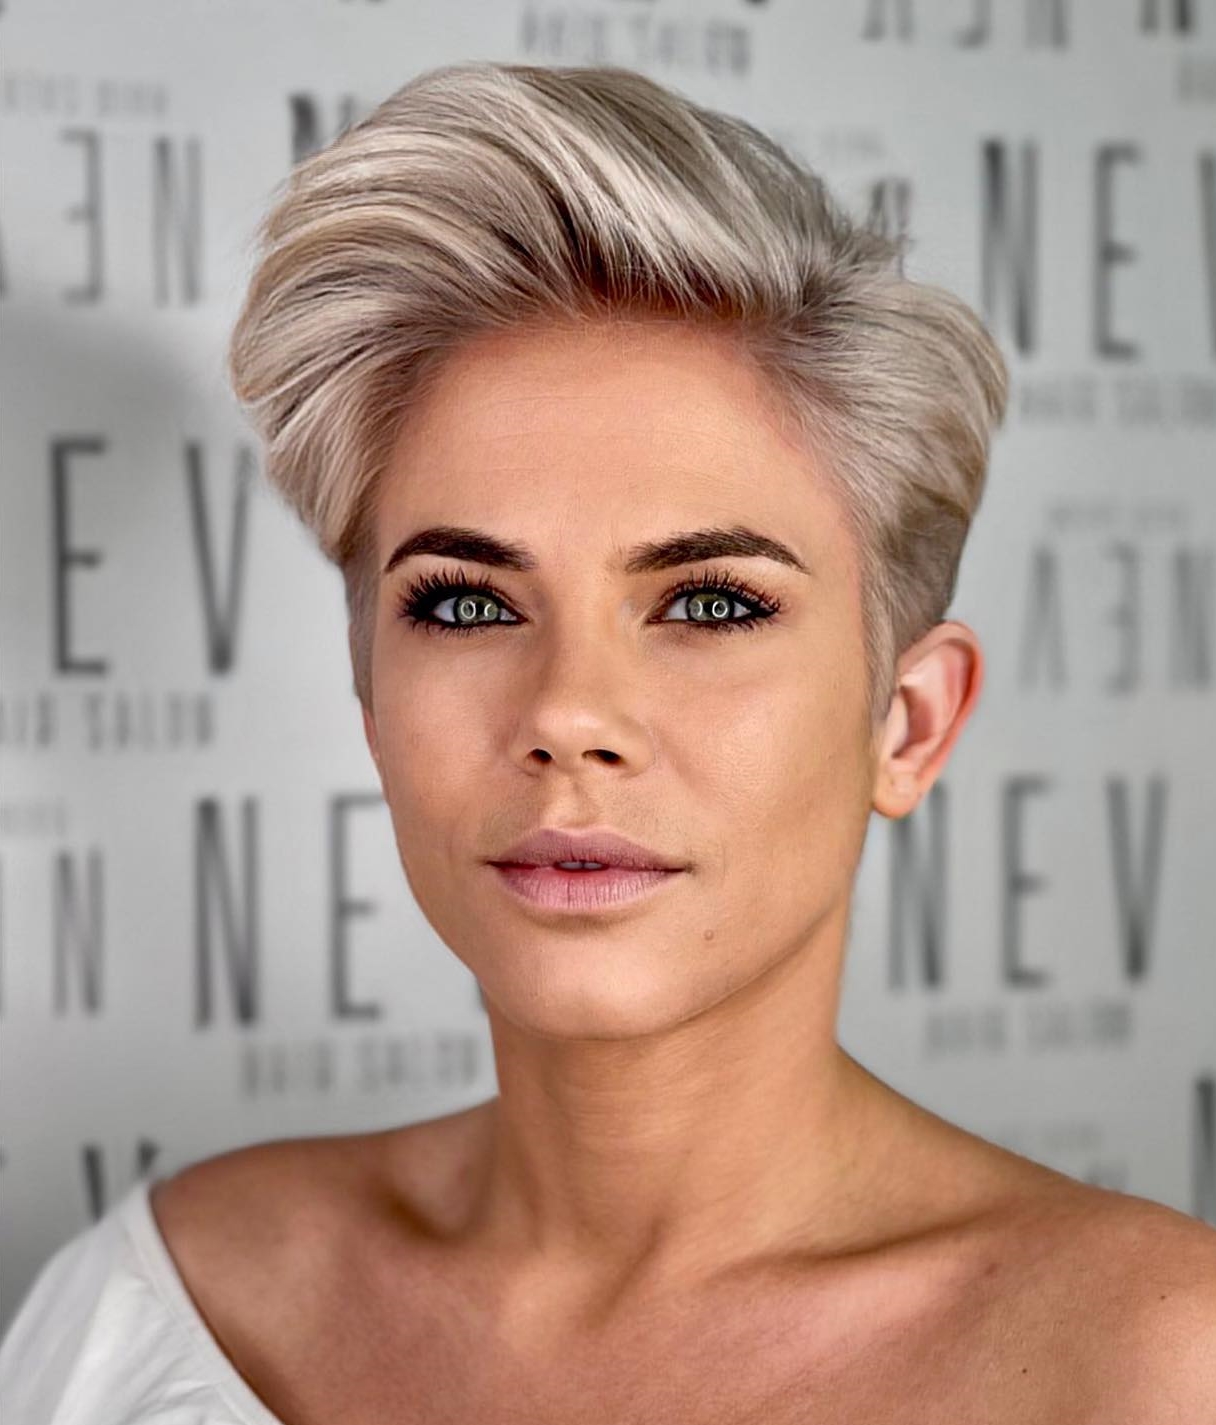 22 Exclusive Ideas to Style a Pixie Haircut - Hairstylery